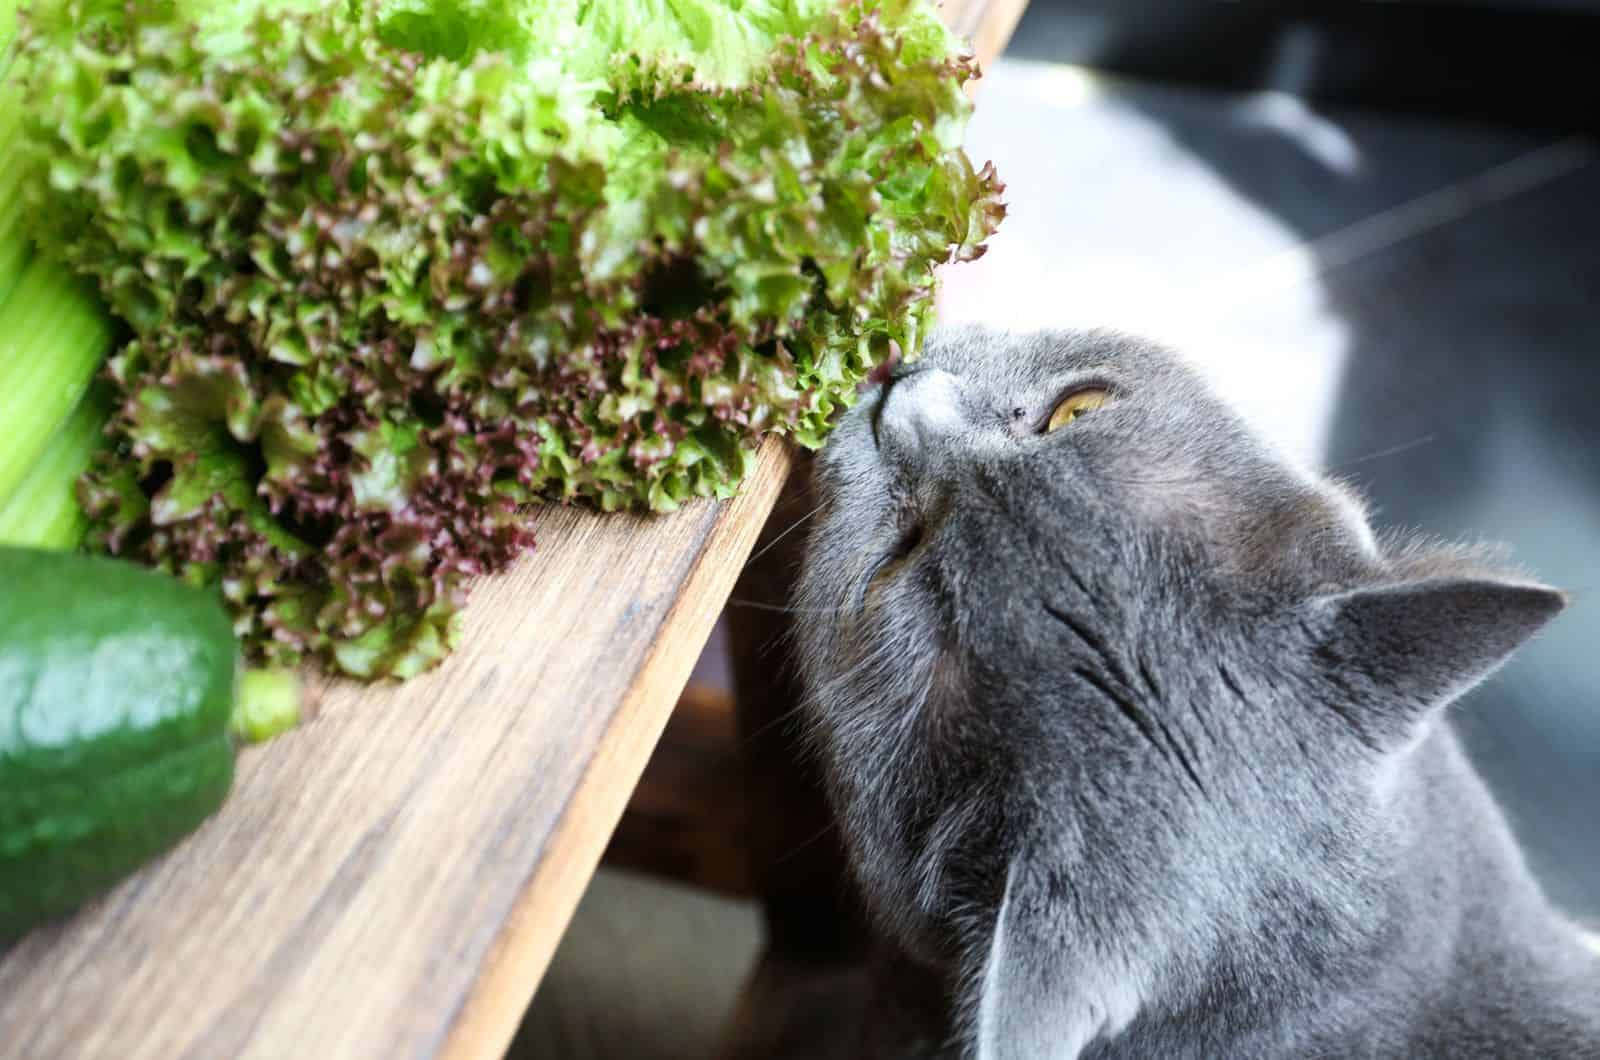 cat smelling green lettuce on the table